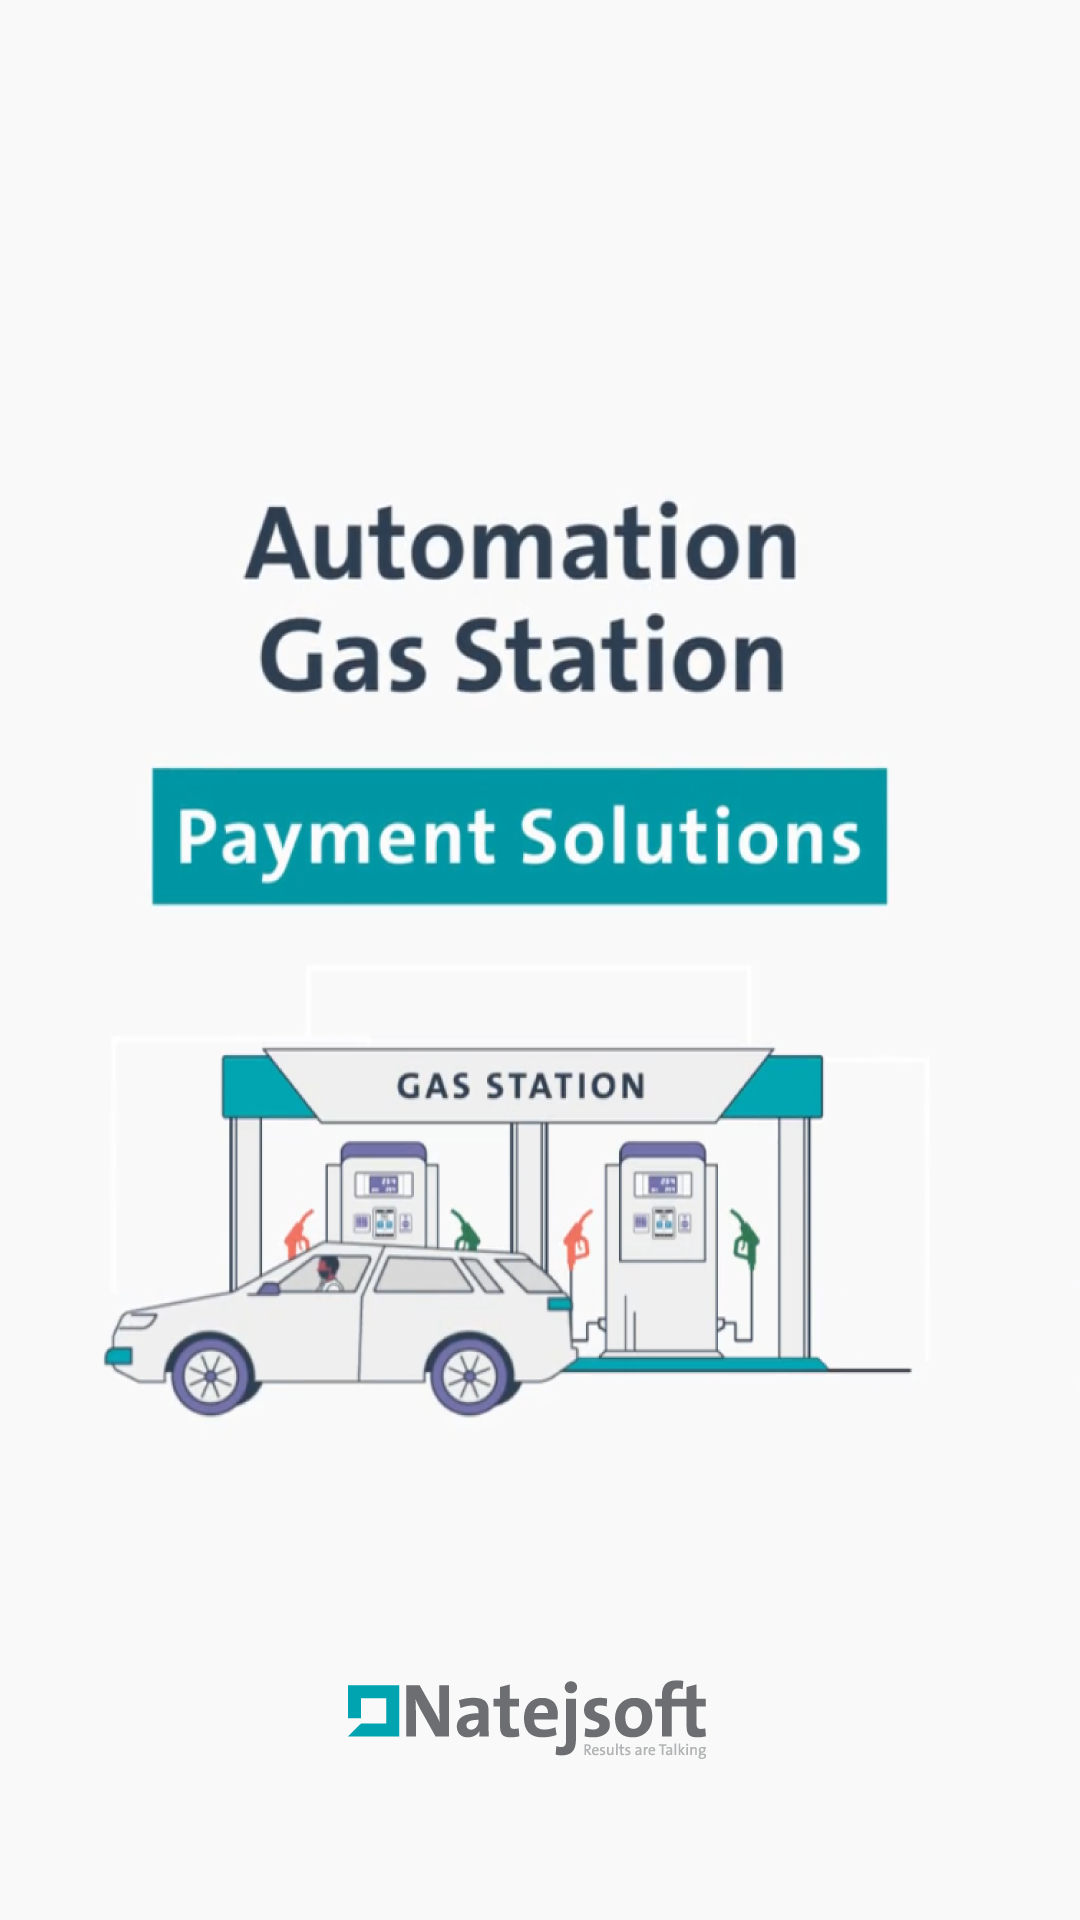 Automation Gas Station Payment Solutions